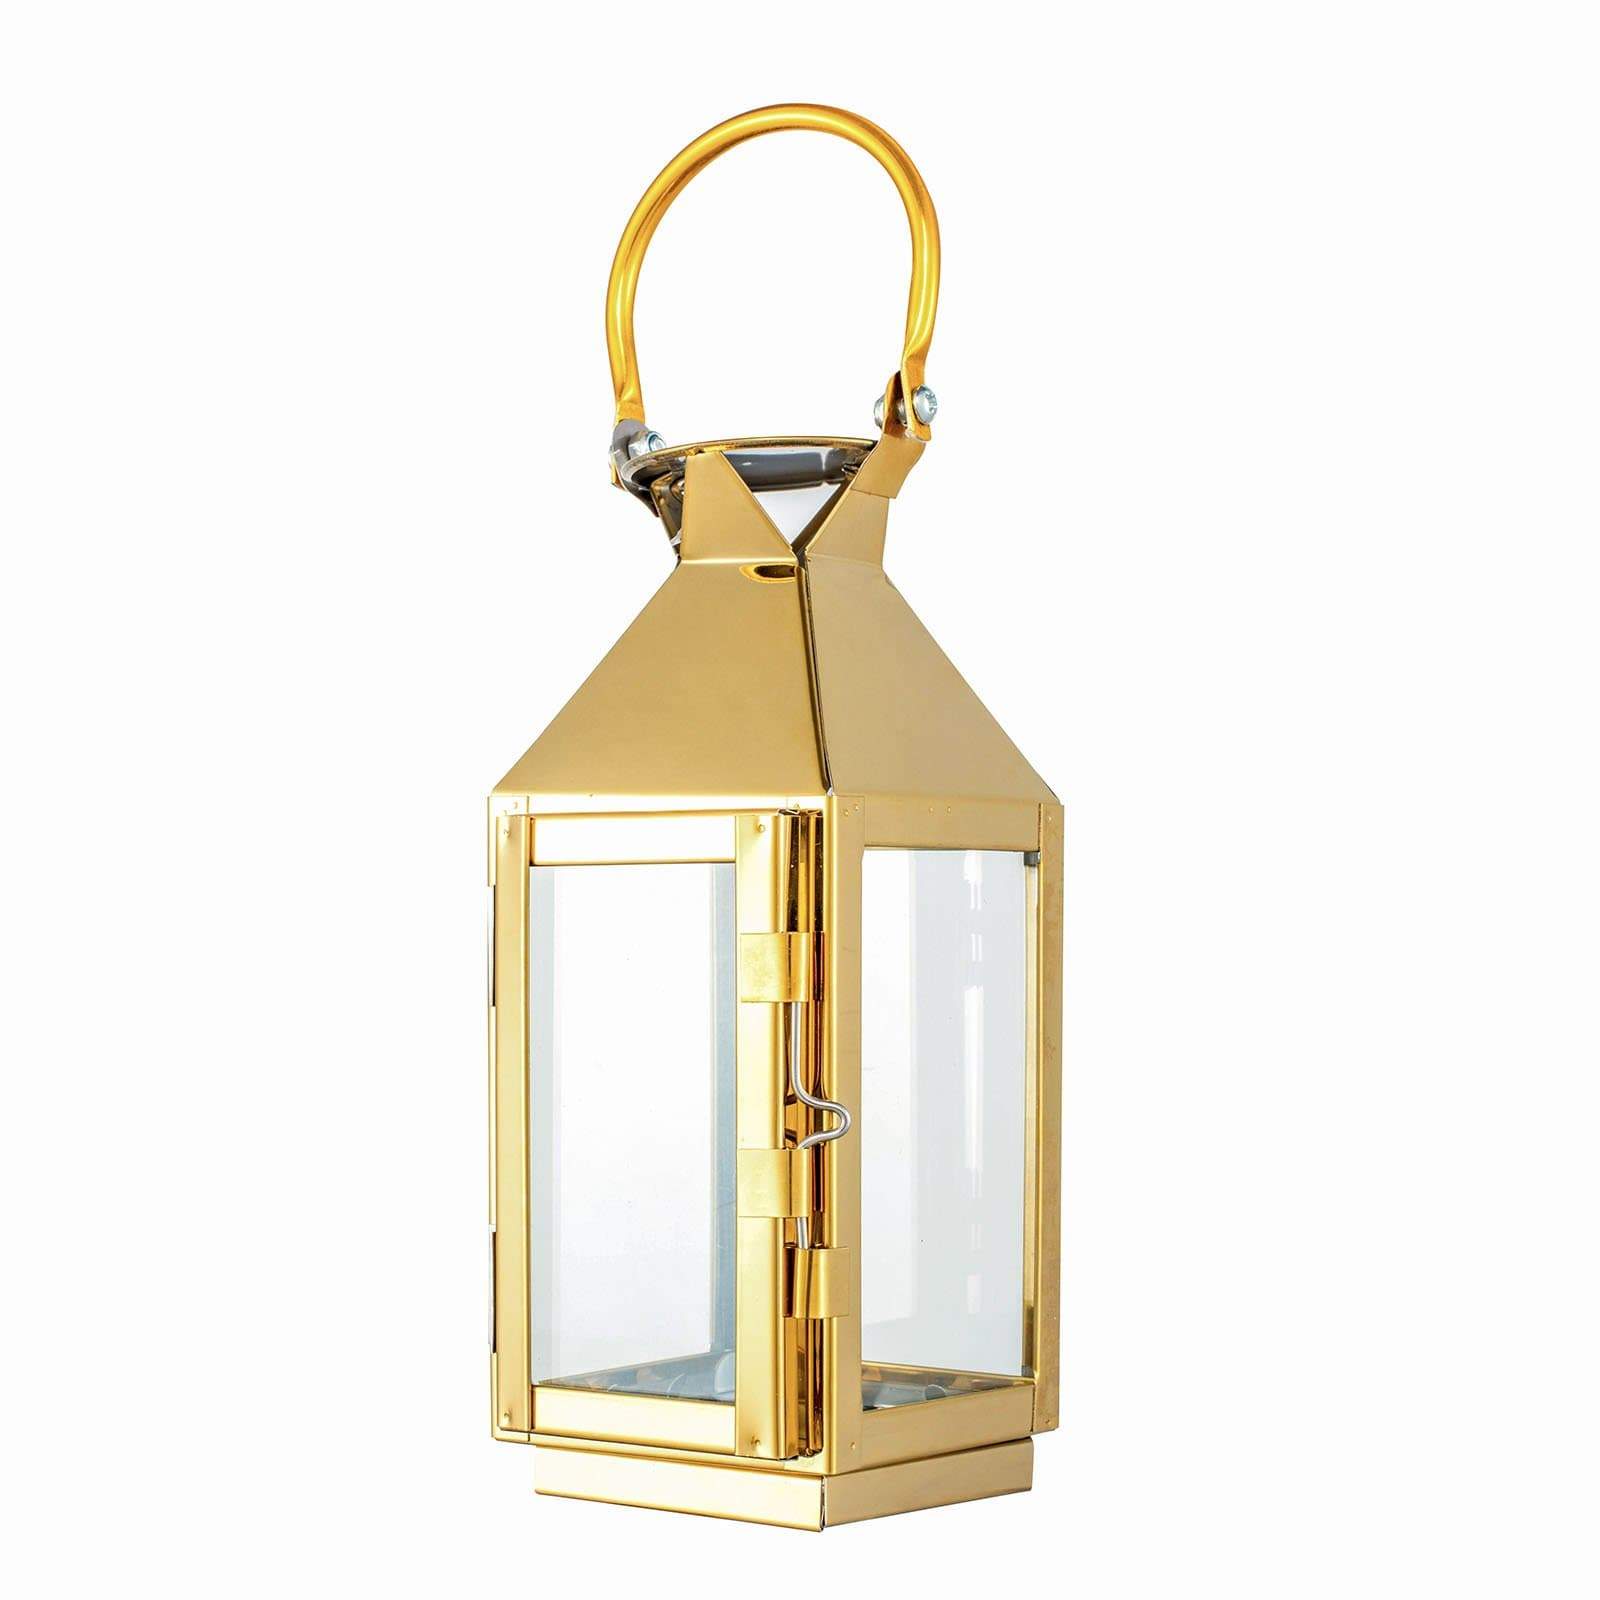 8 in tall Metal Lantern Candle Holder Centerpiece